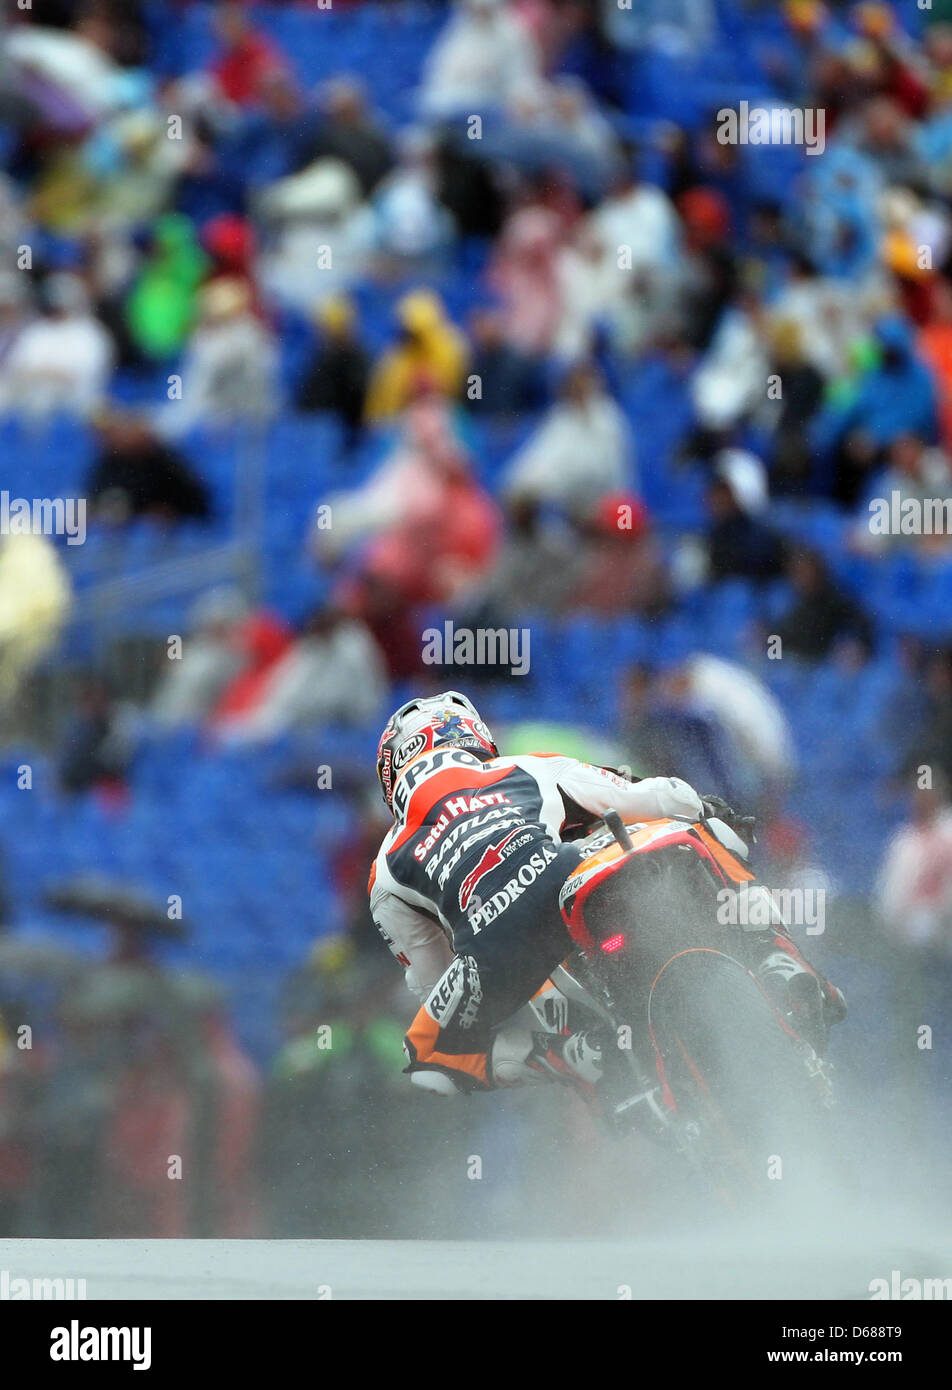 Spanish MotoGP driver Dani Pedrosa during the qualifying for the German Grand Prix on the racetrack at the Sachsenring in Hohenstein-Ernstthal, Germany, 07 July 2012.  Photo: JAN WOITAS Stock Photo